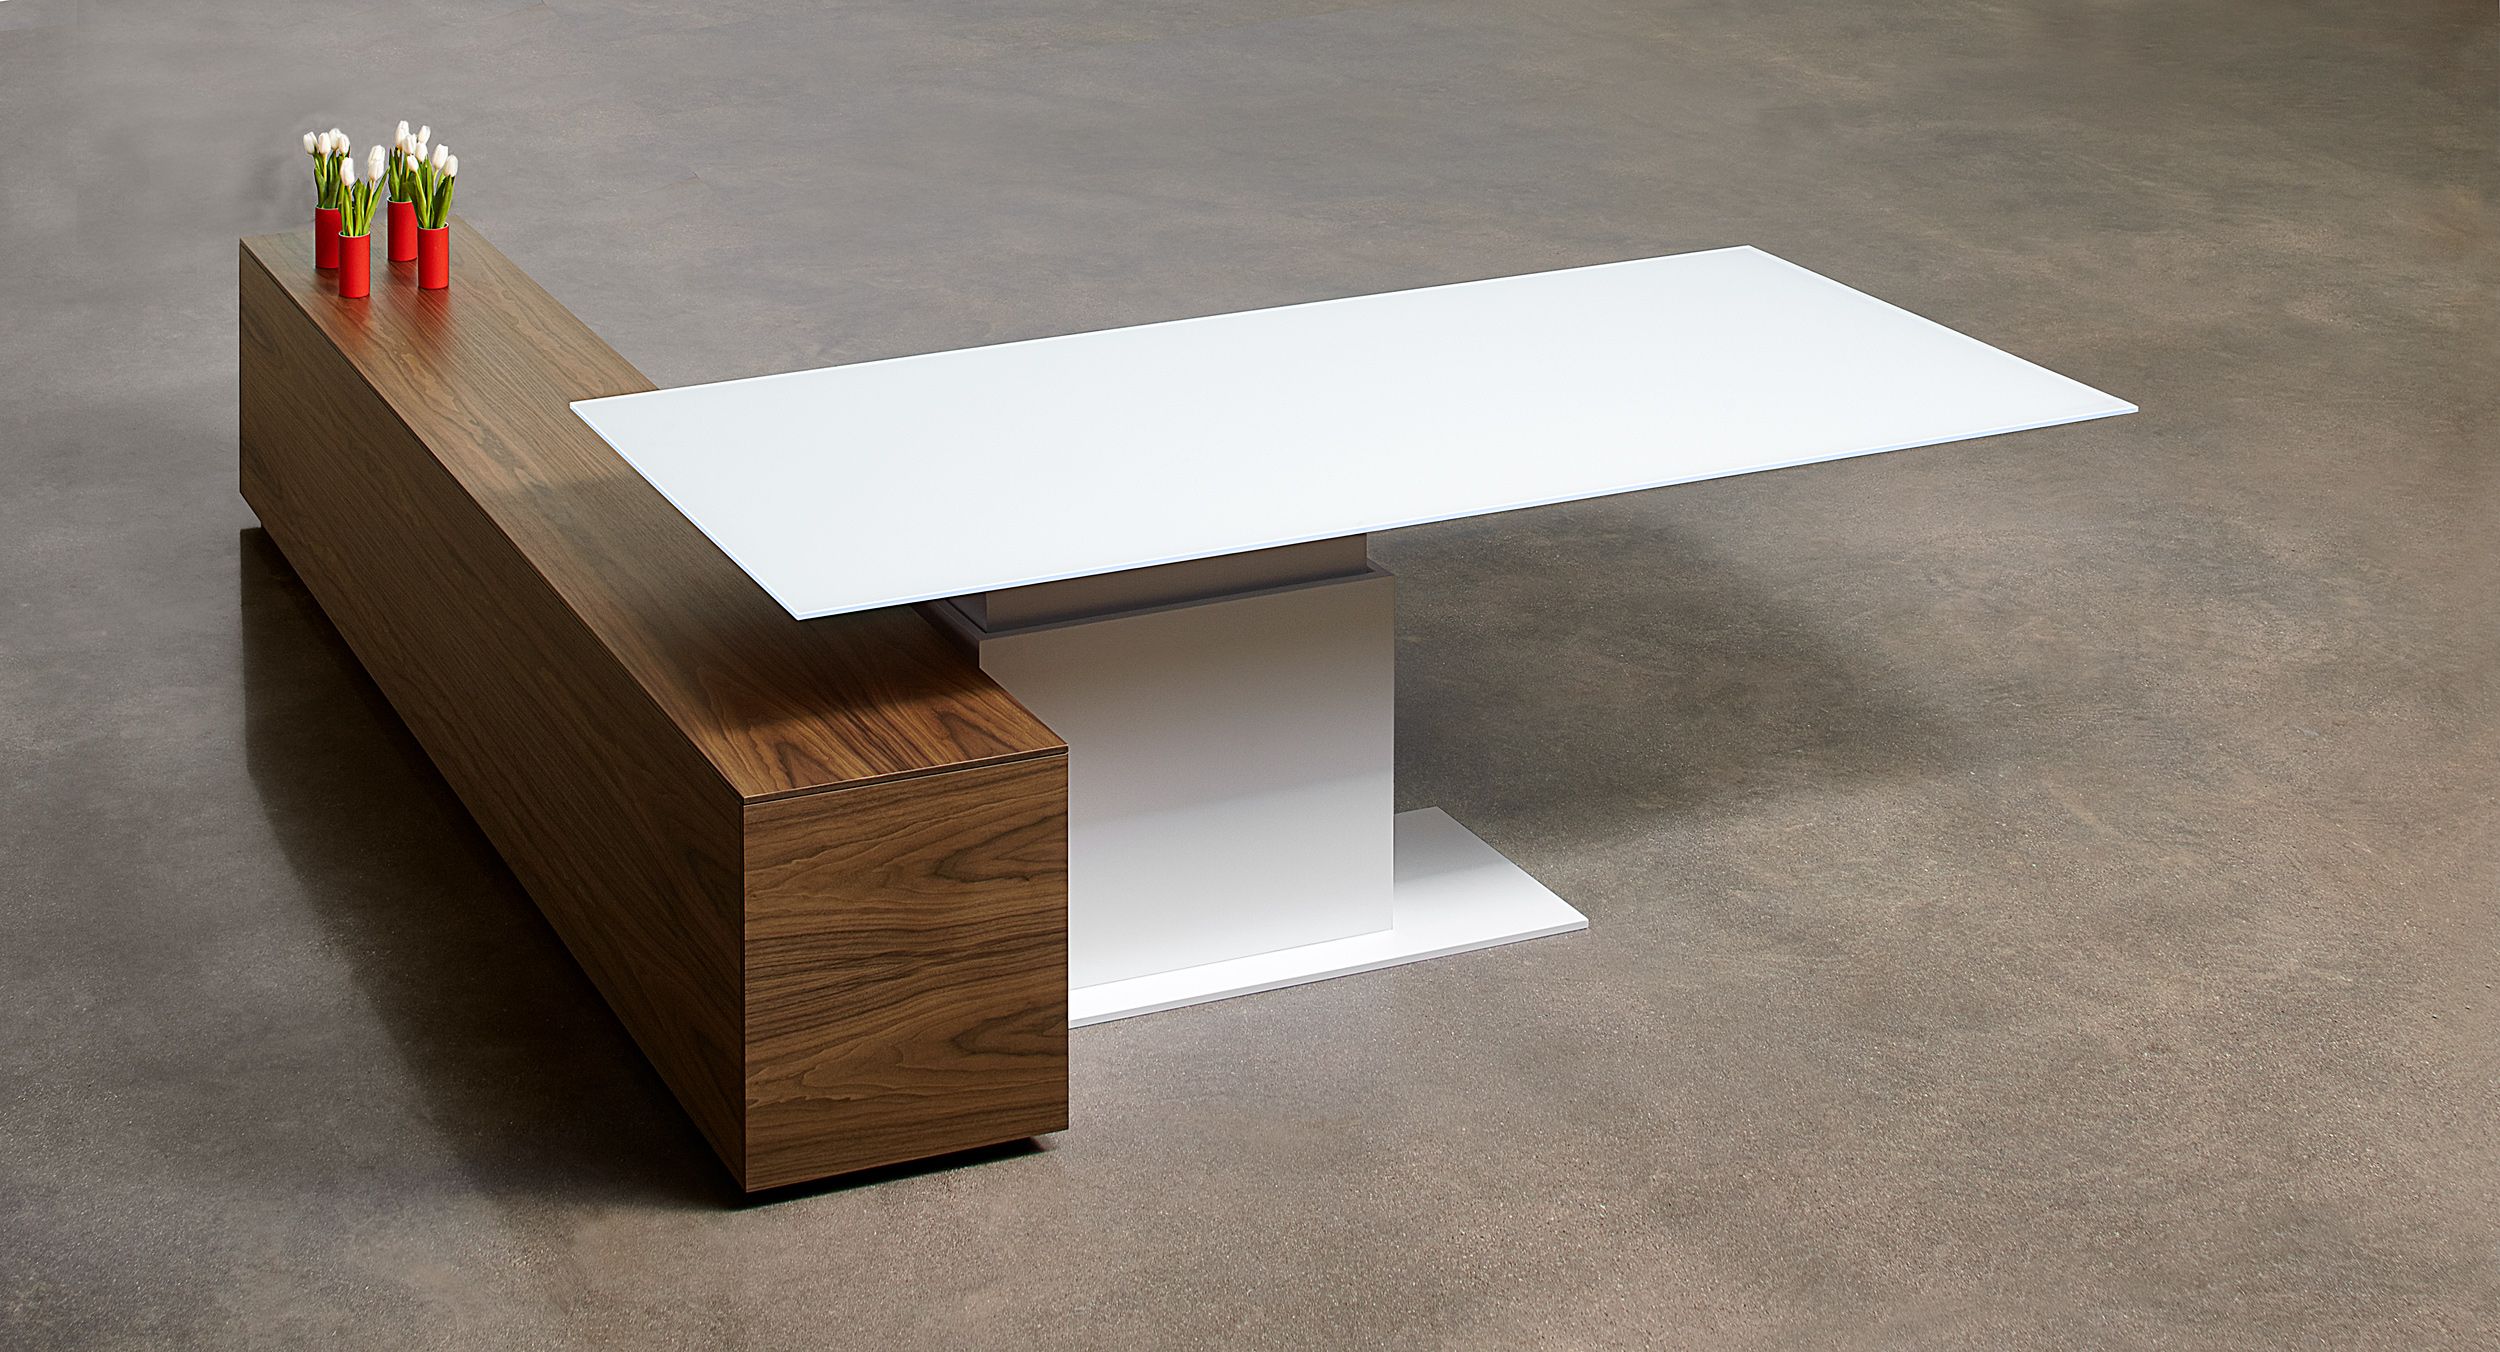 This adjustable-height desk features a beautifully-cantilevered surface.